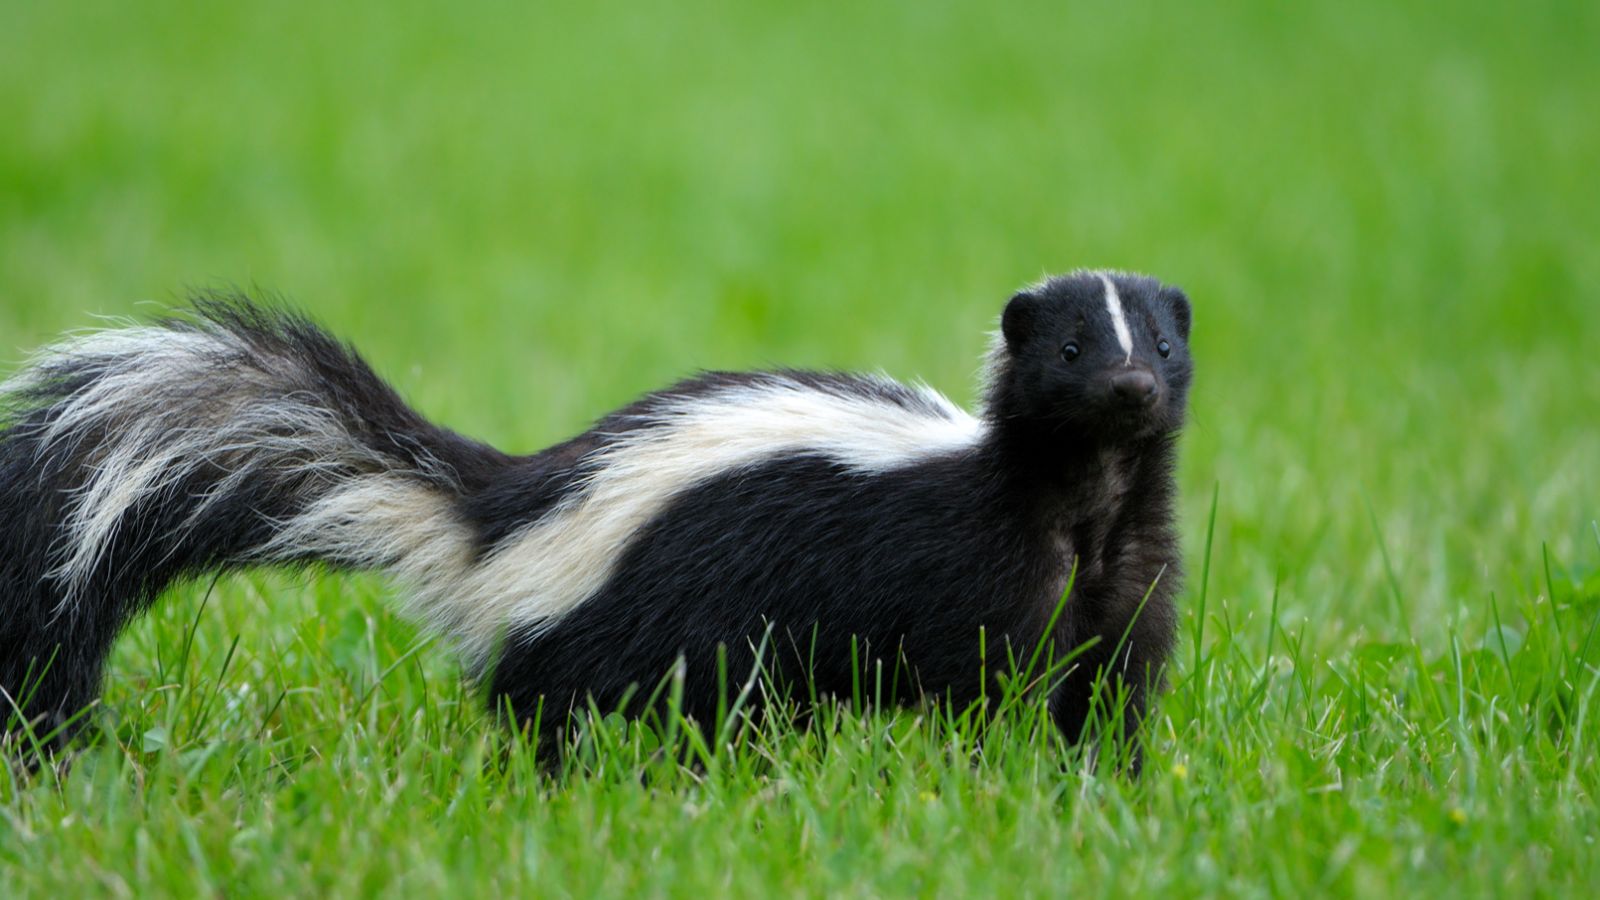 <p>Despite their unpleasant odor, the adorable charm of skunks leads many Americans to consider keeping them as pets. However, according to<a href="https://www.thesprucepets.com/skunks-as-pets-1237314#:~:text=Currently%2C%20you%20can%20legally%20own,West%20Virginia%2C%20Wisconsin%20and%20Wyoming."> The Spruce Pets</a>, several states prohibit the keeping of skunks because they are at risk of carrying rabies. They also have many specialized needs that can be difficult to meet in a domestic setting.</p>